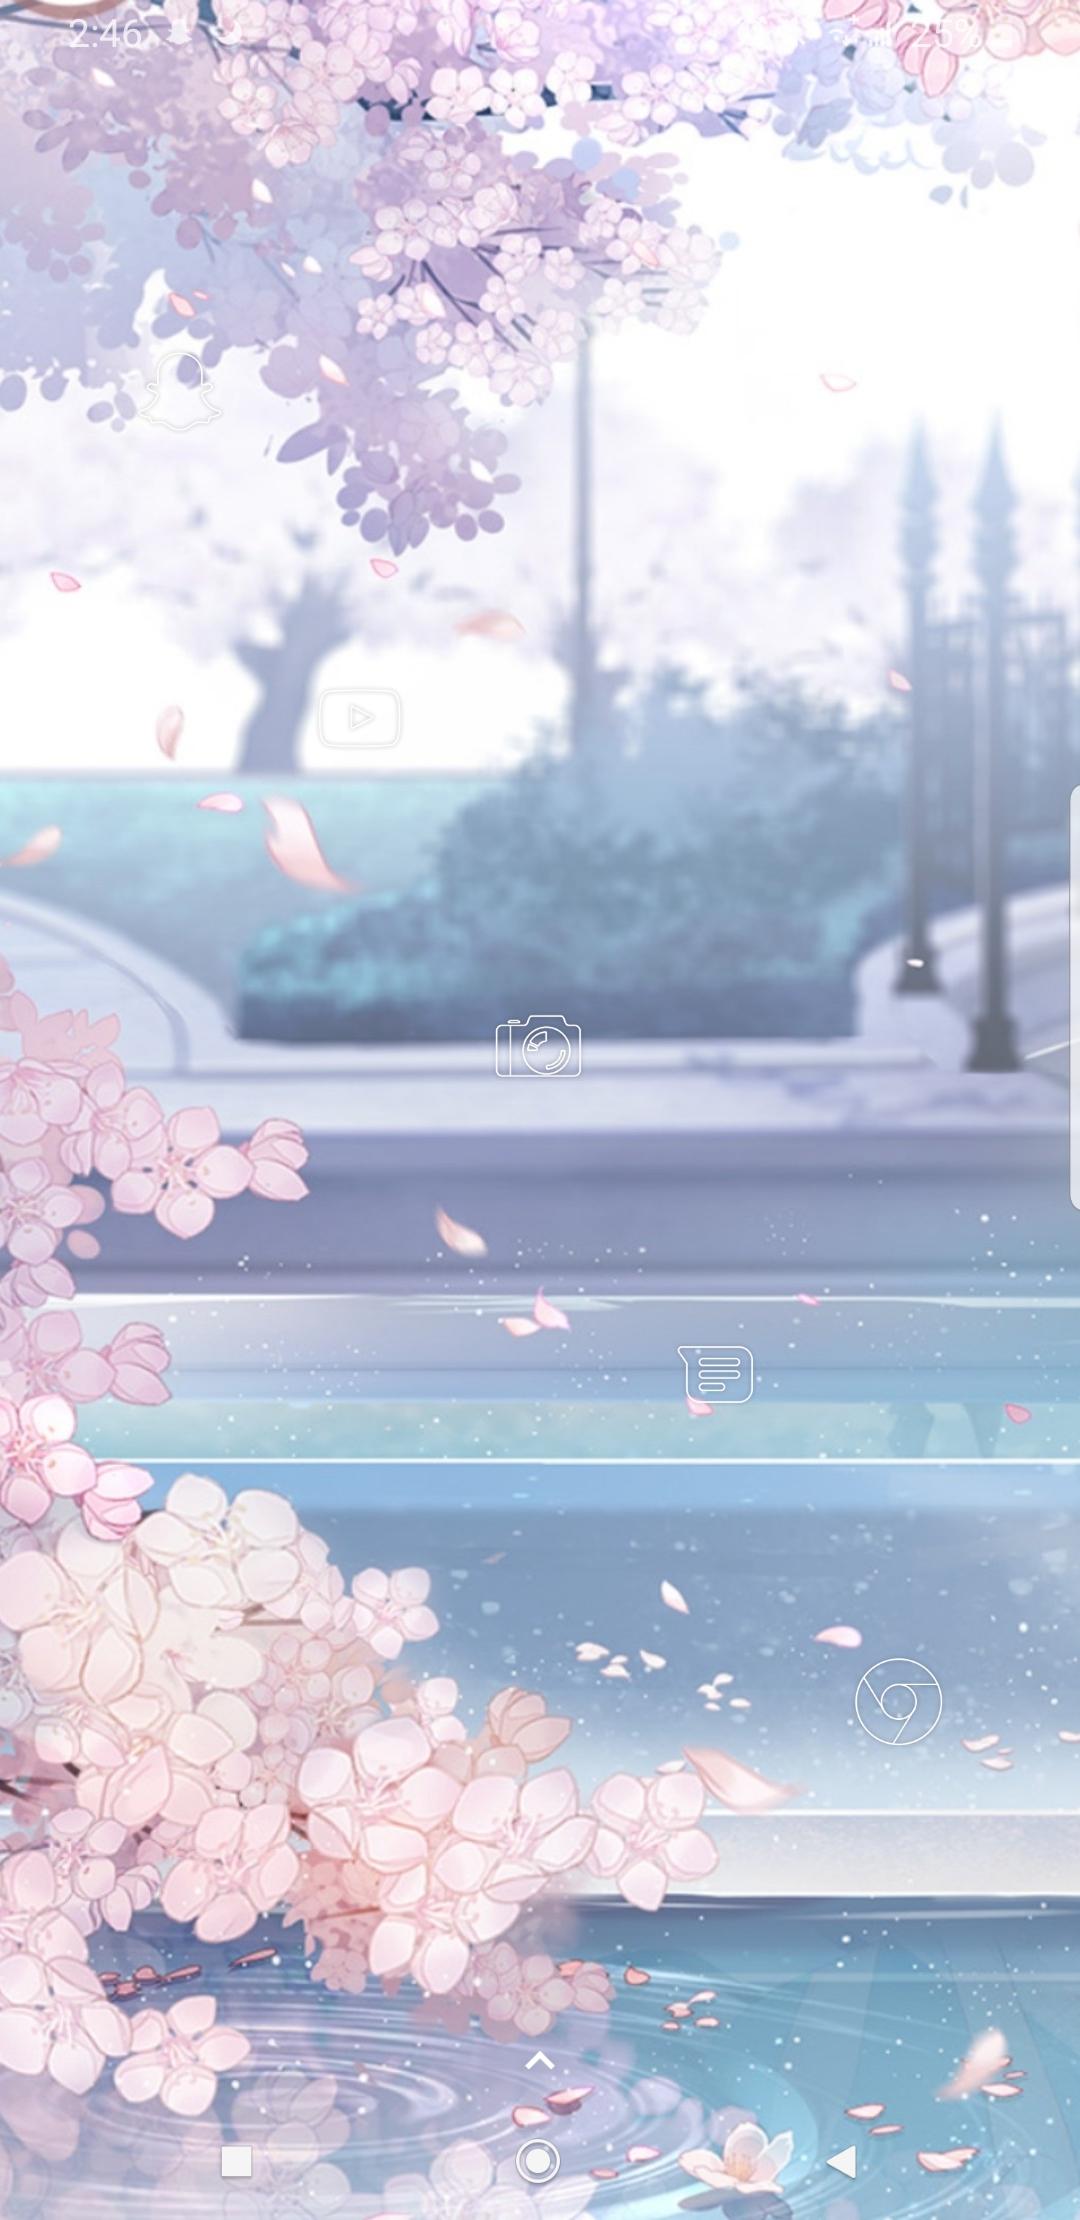 The hell event background make beautiful phone wallpaper :)